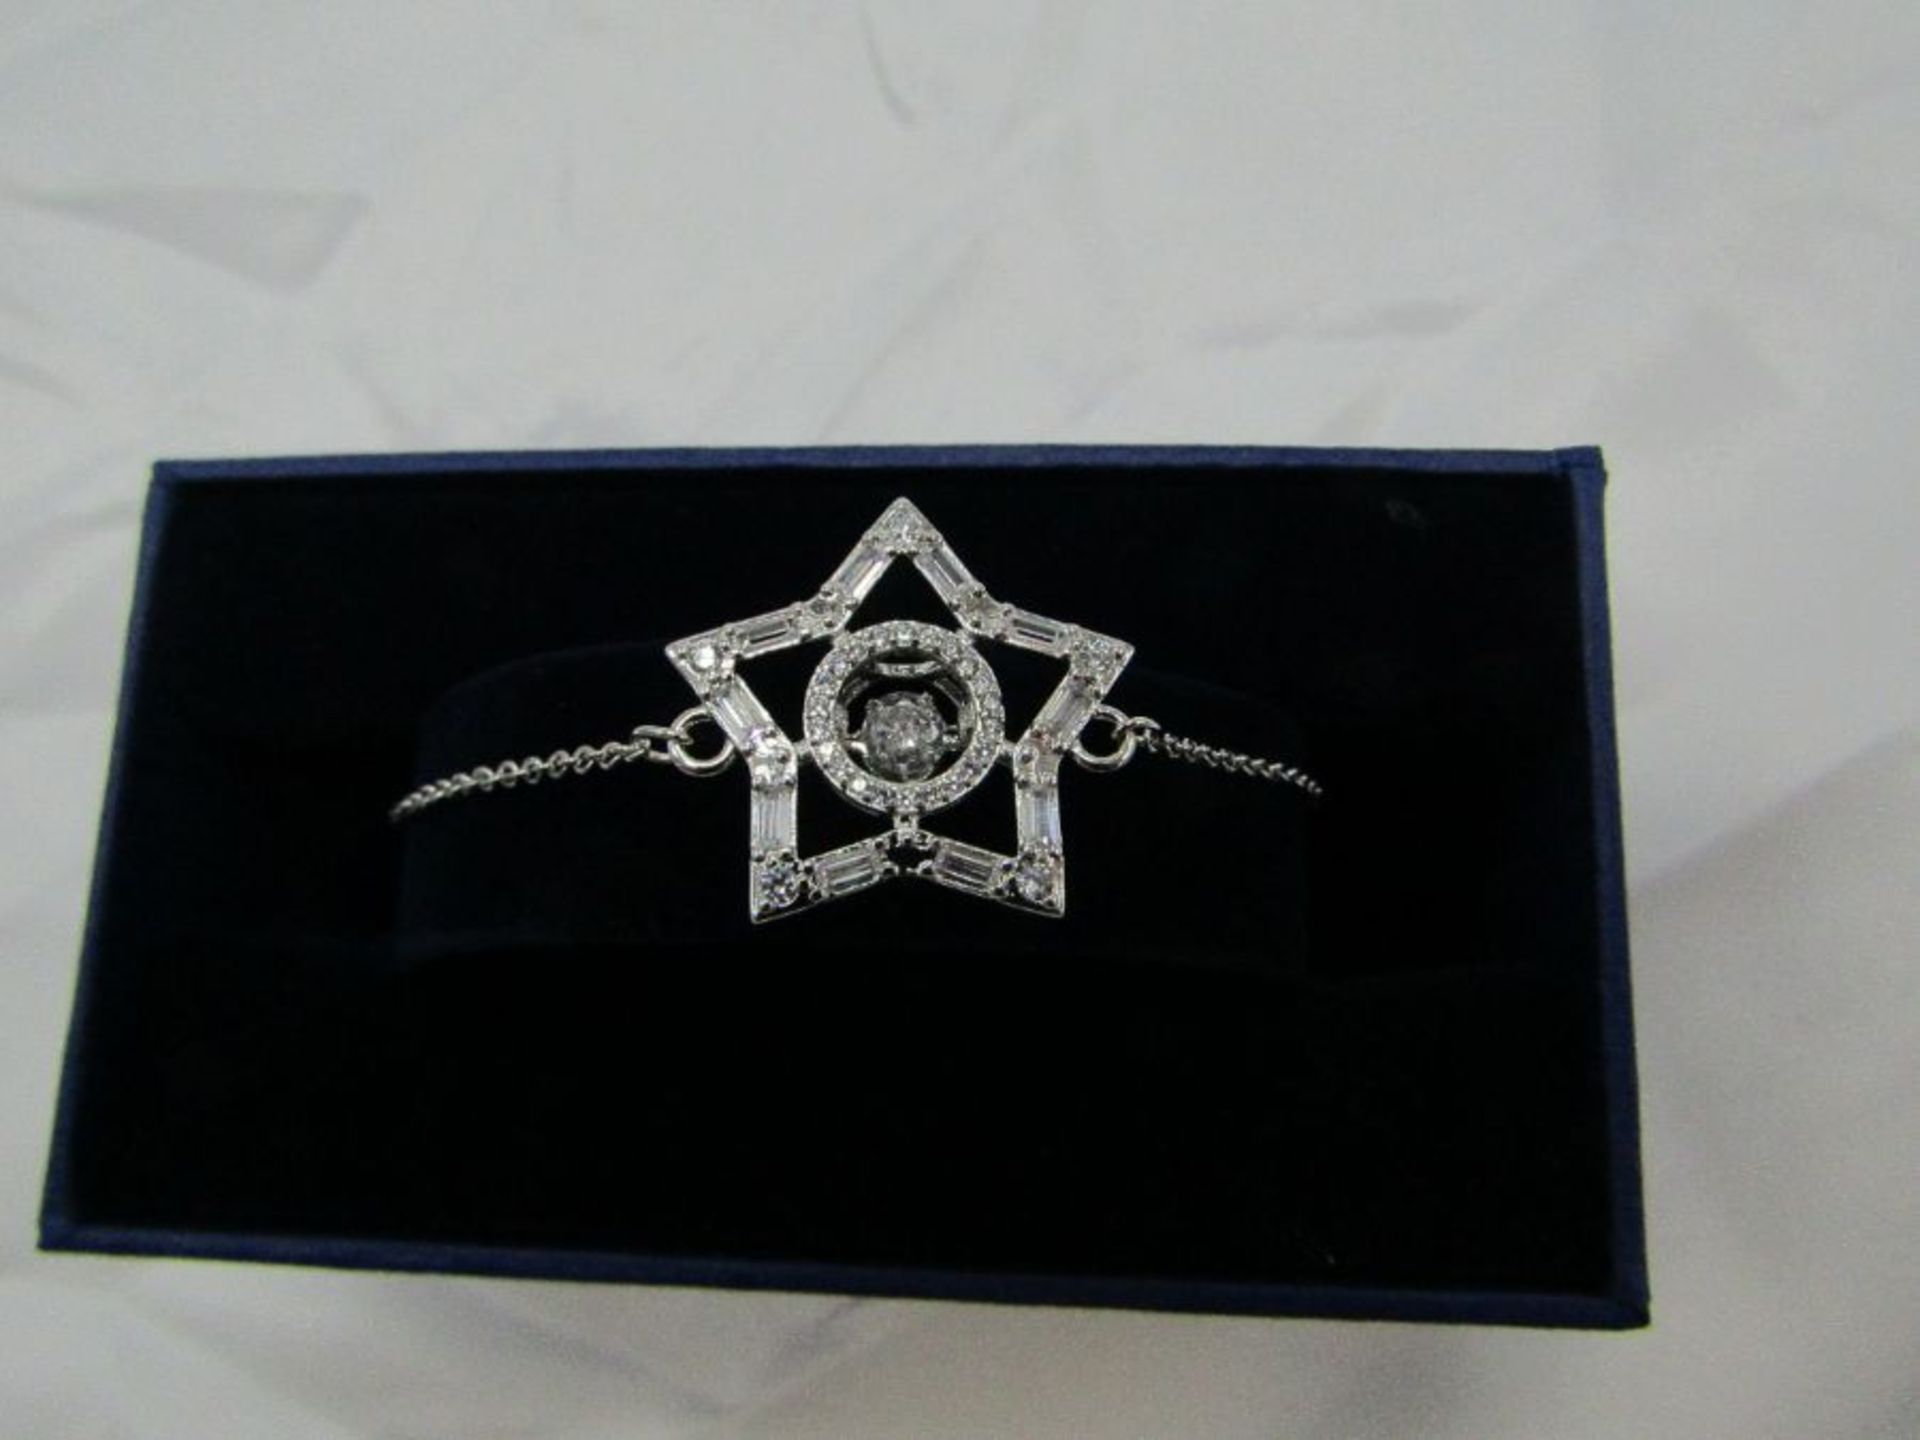 Swarovski 5617882 Iconic Silver Plated Star Bracelet, new in presentation box and gift bag. - Image 2 of 2